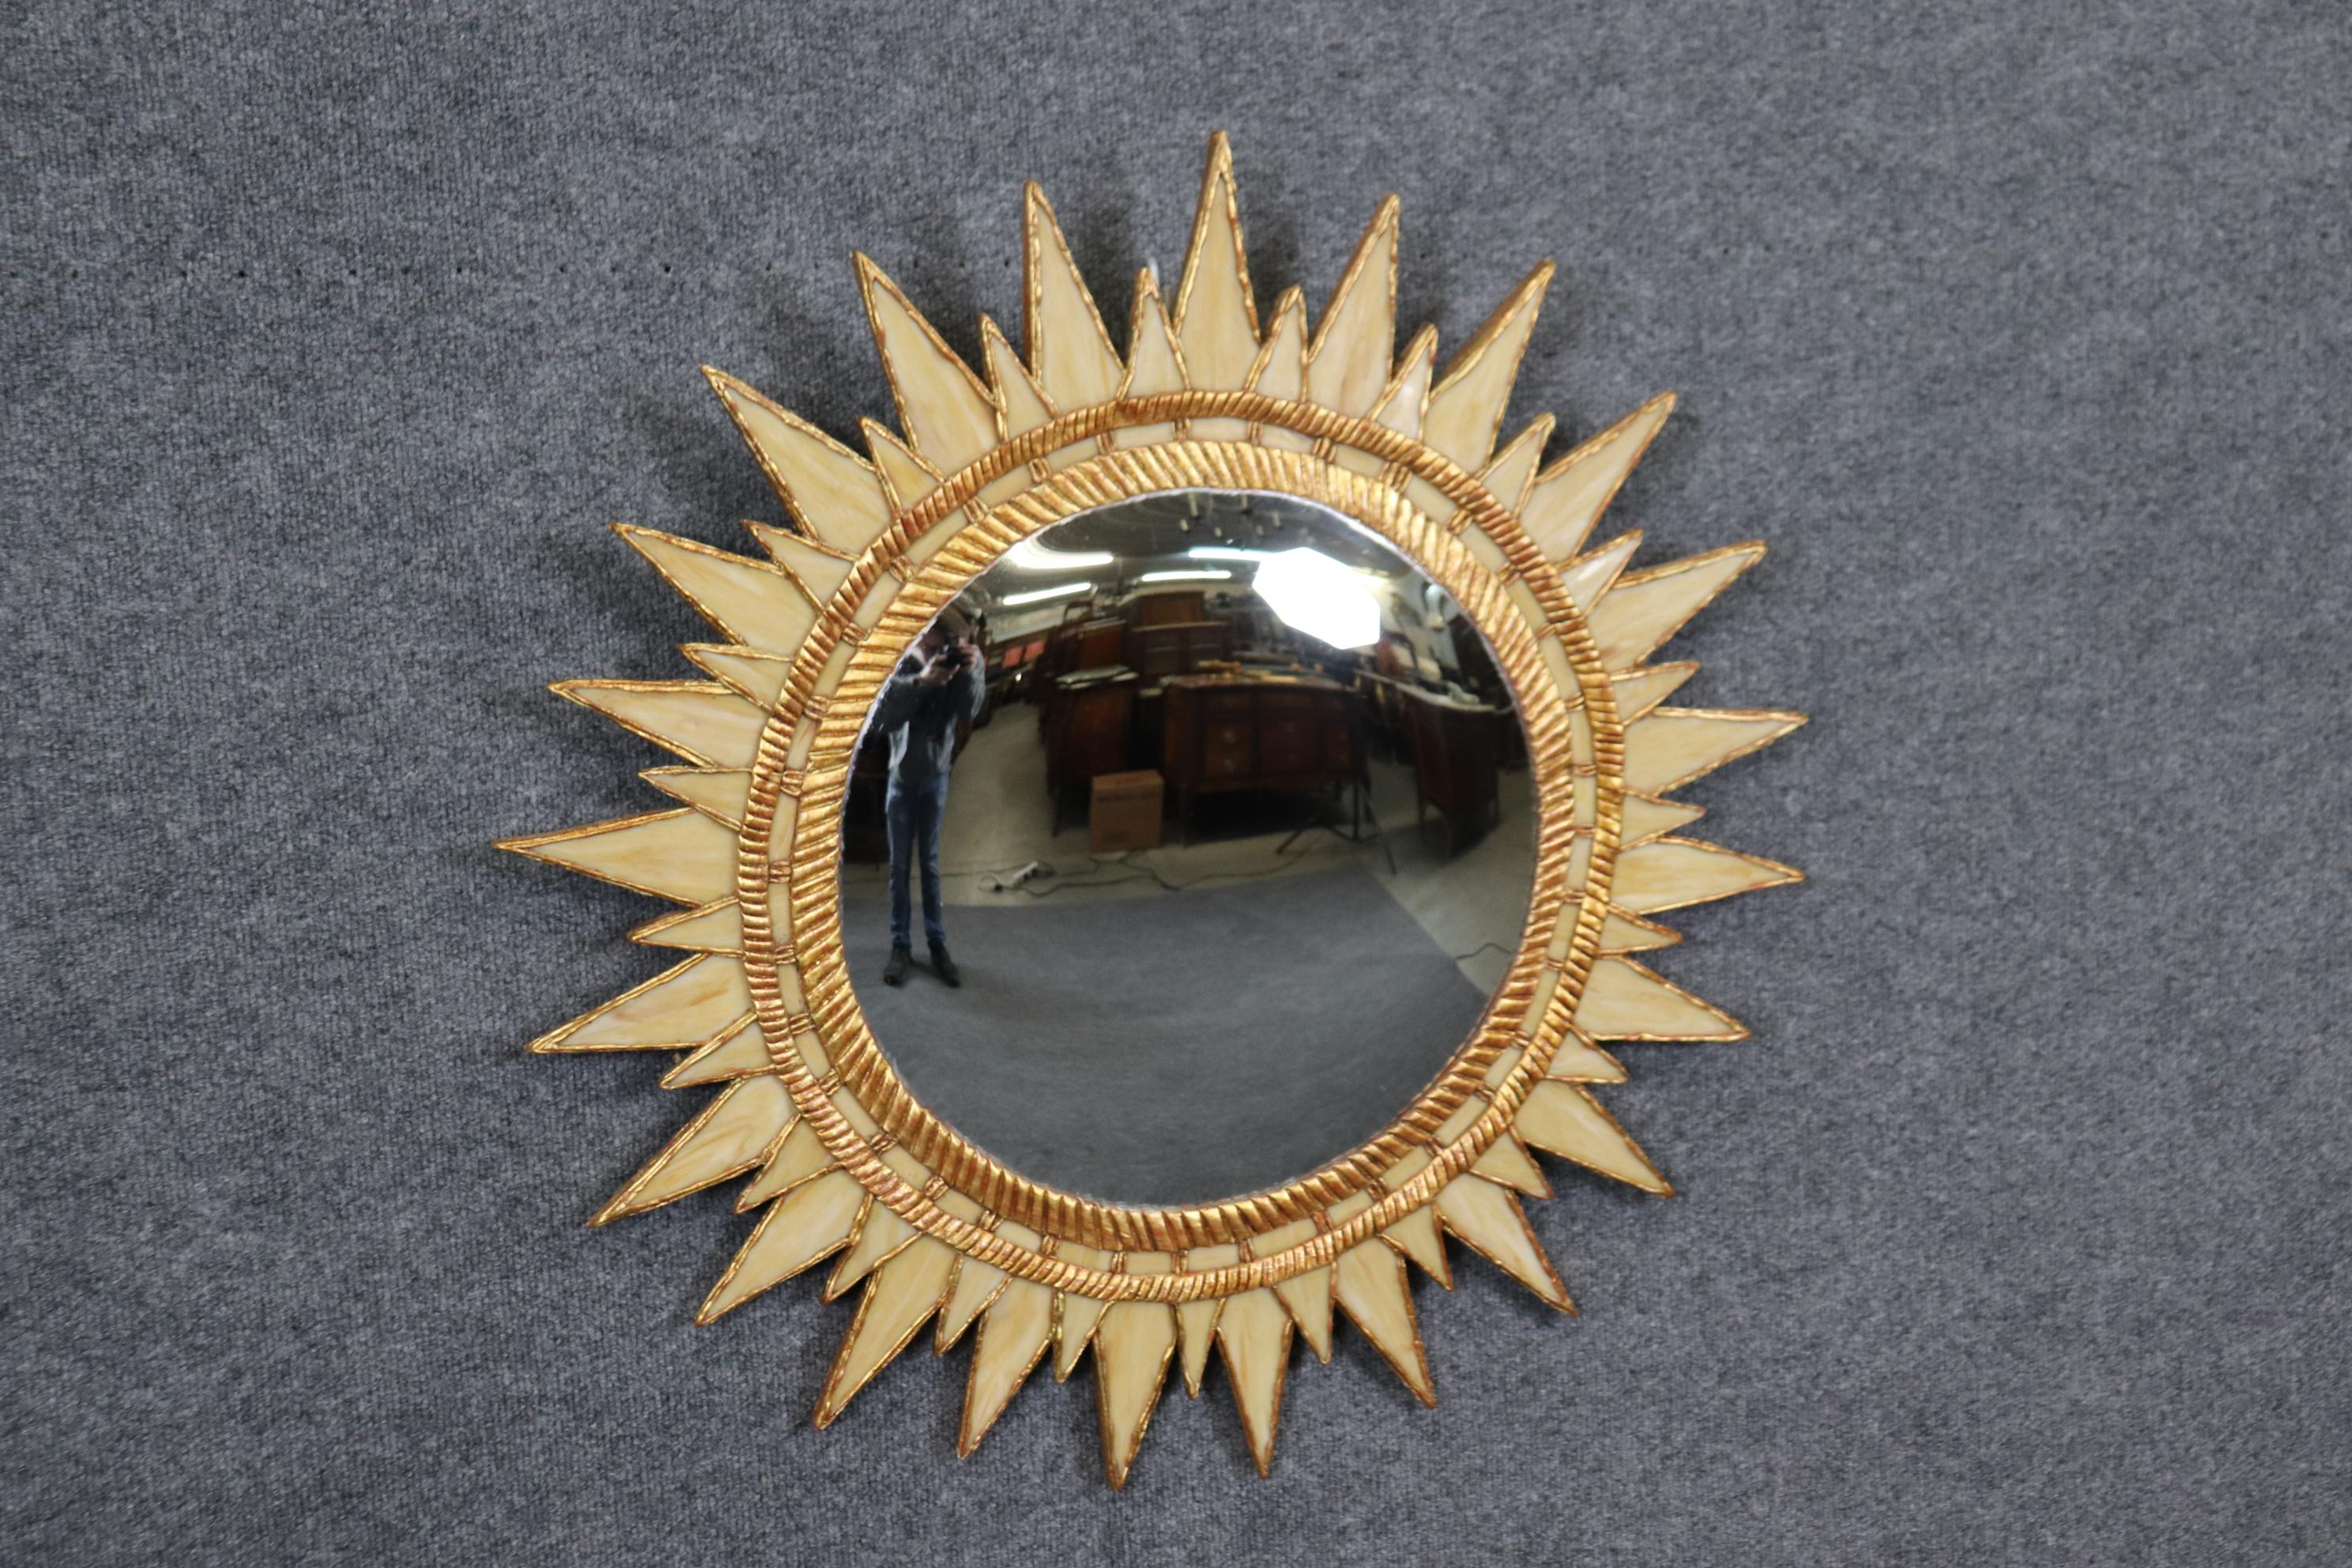 This is a rare and unique mirror made of slag glass panels wirthin a beechwood frame in creme and a gold leaf gilded finish. The mirror is absolutely exceptional-a true survivor or time with no aparent damage the the convex mirror or the slag glass